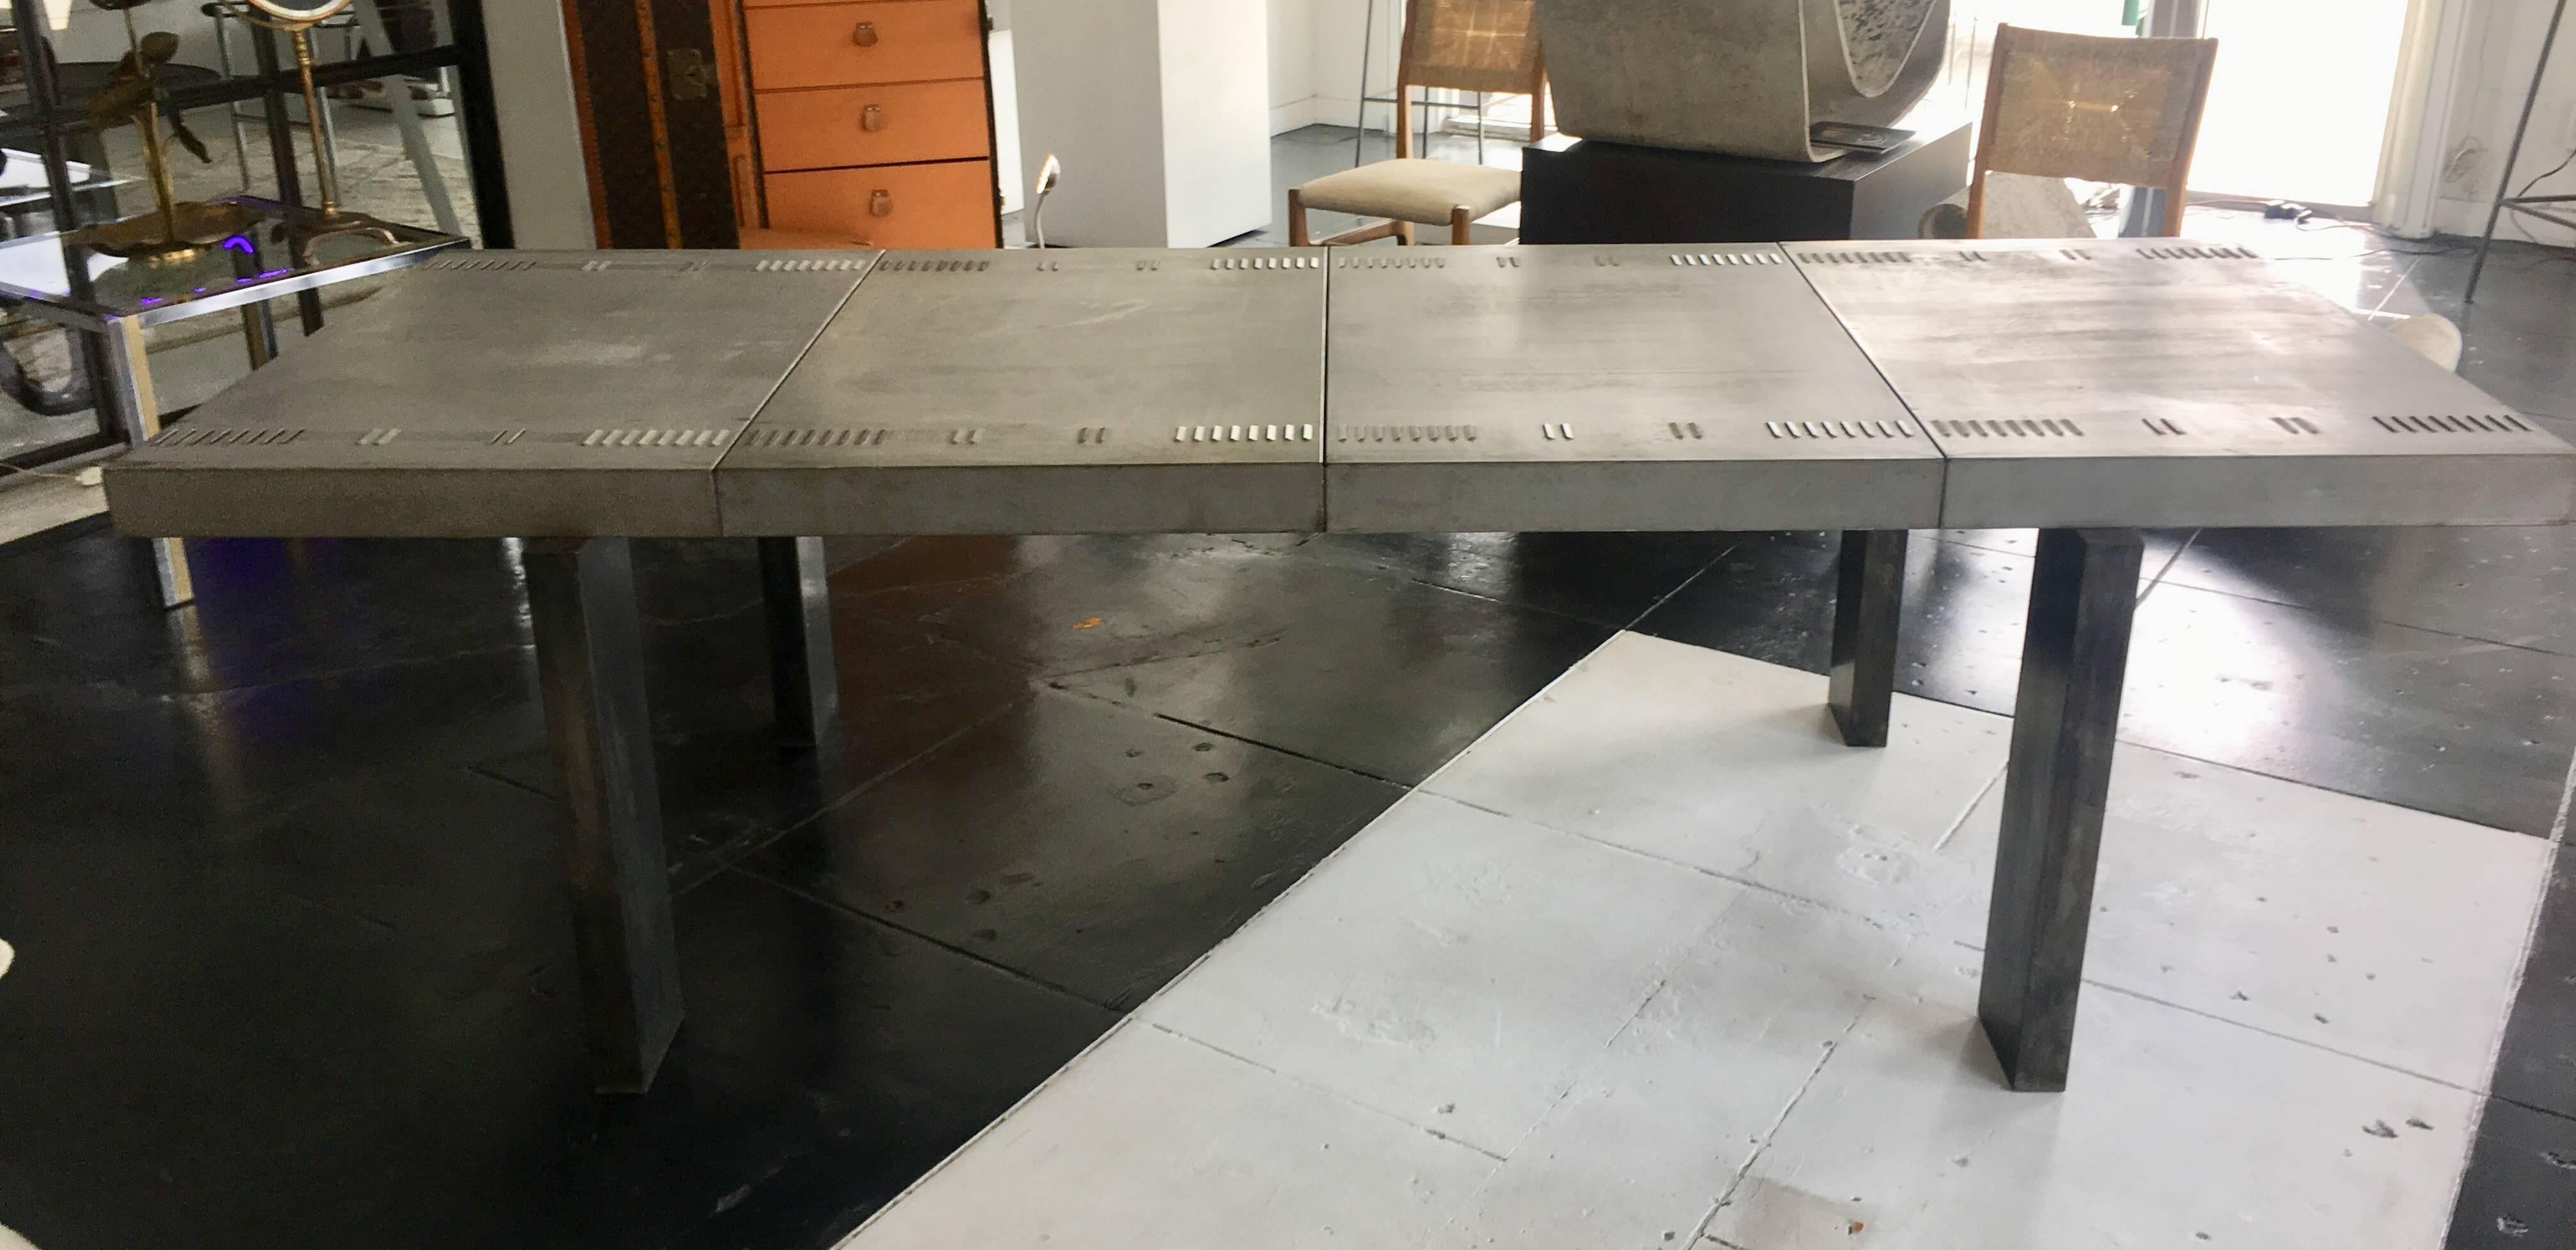 Unusual 1940s Industrial desk or dining table with an especially rare zinc top. Unique craft and metal work not commonly seen elsewhere.